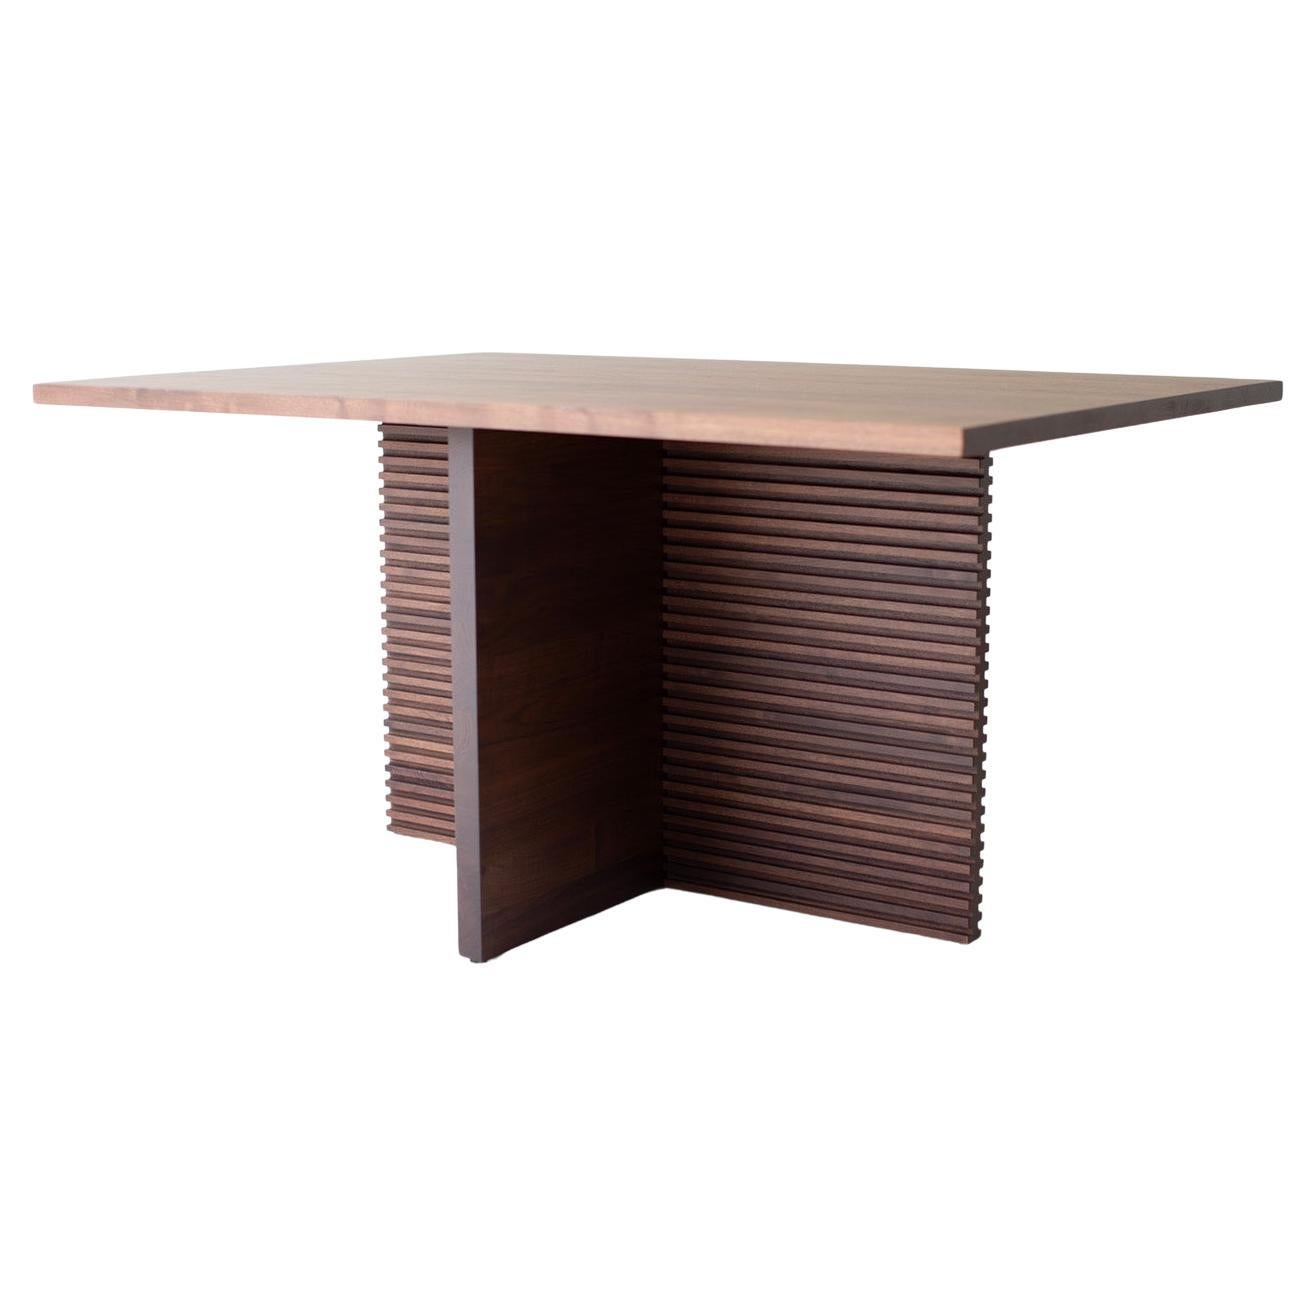 Bertu Dining Table, Pedestal Dining Table, Walnut Dining Table, Cicely For Sale